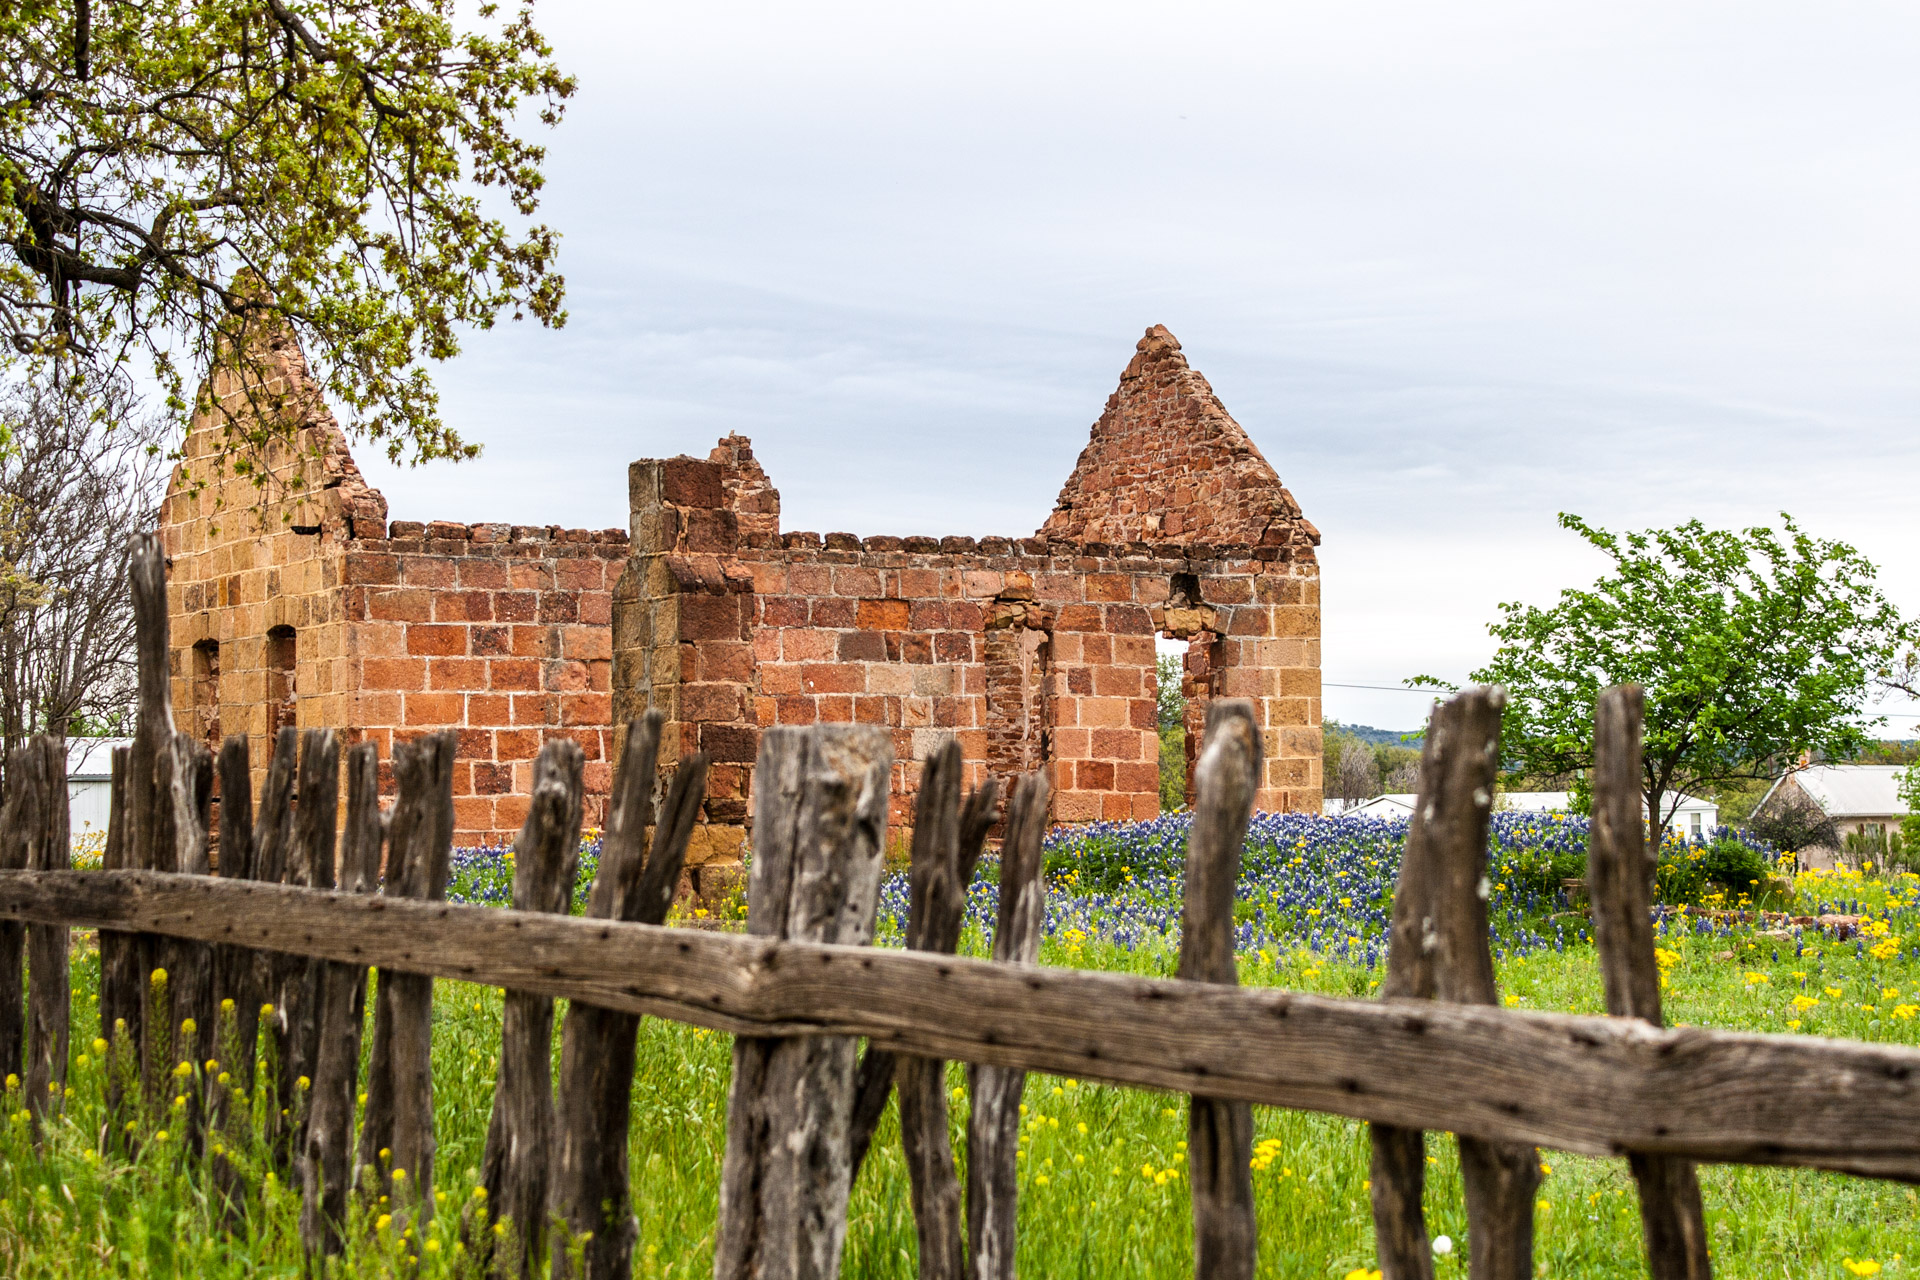 Pontotoc, Texas - A Stone Ruin With Bluebonnets (behind fence)